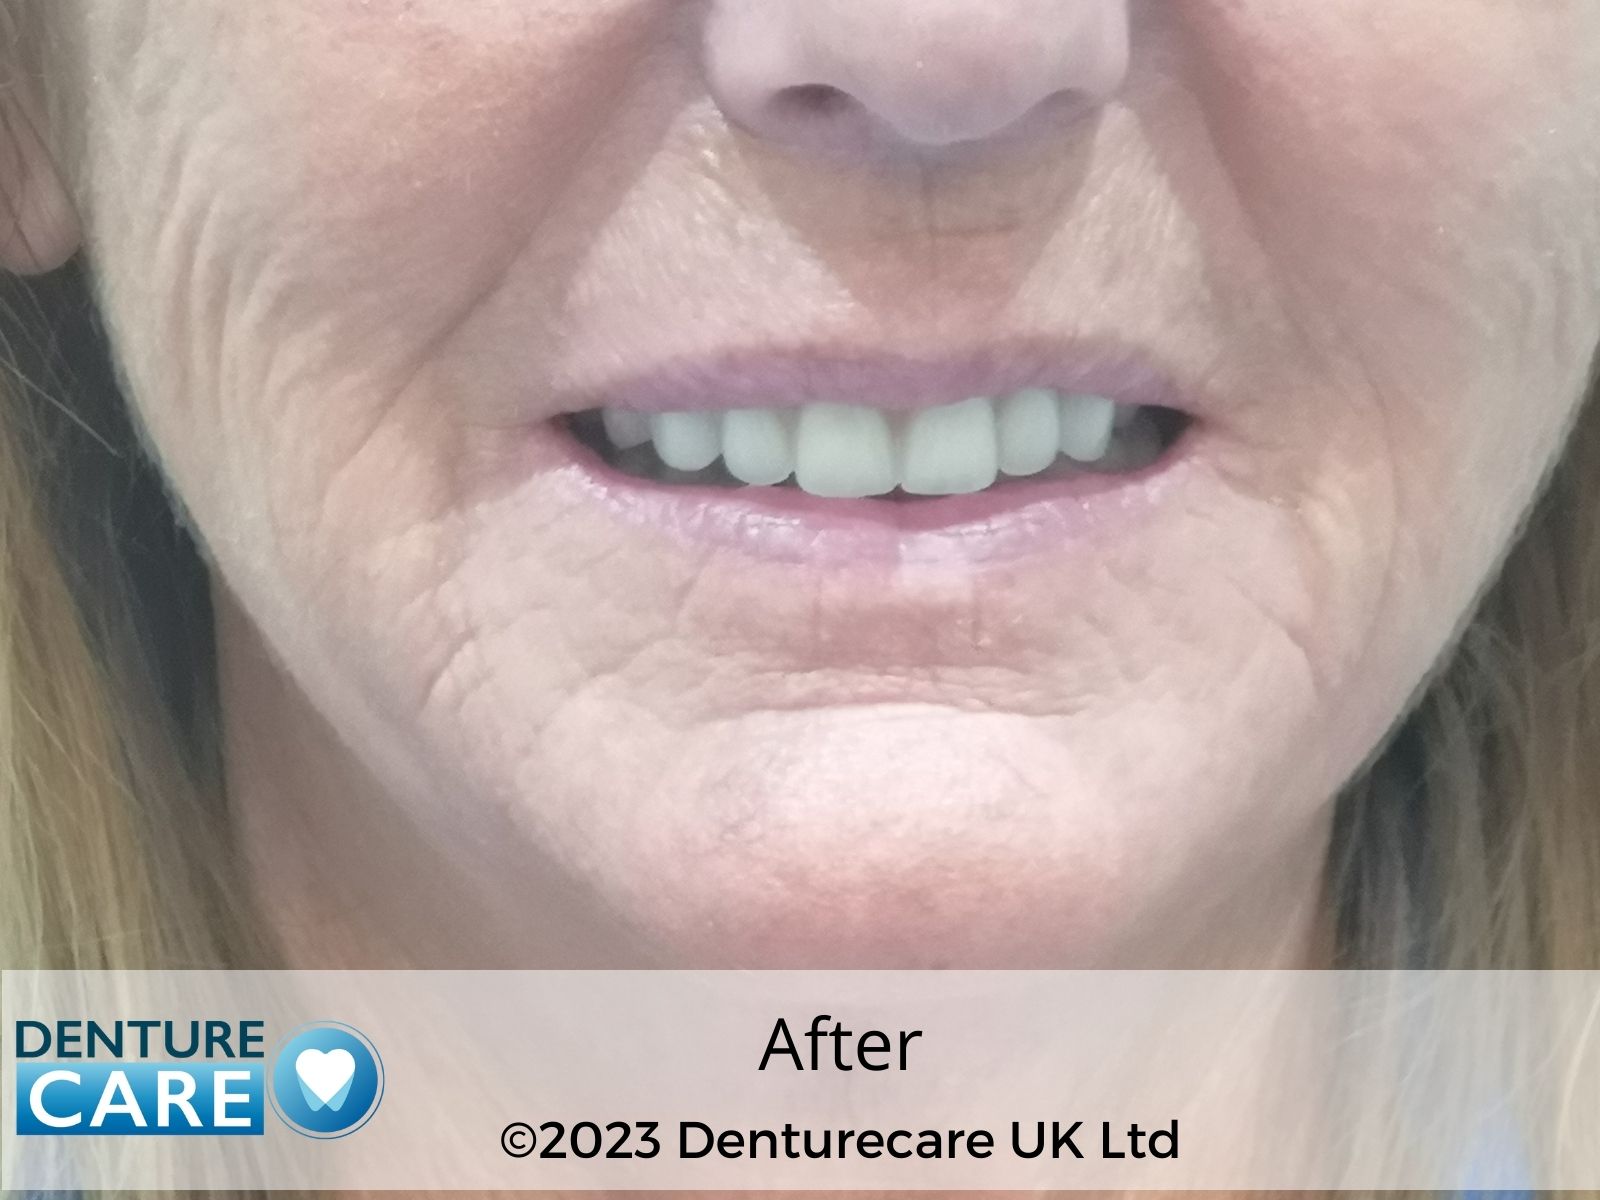 Before and after dentures photos